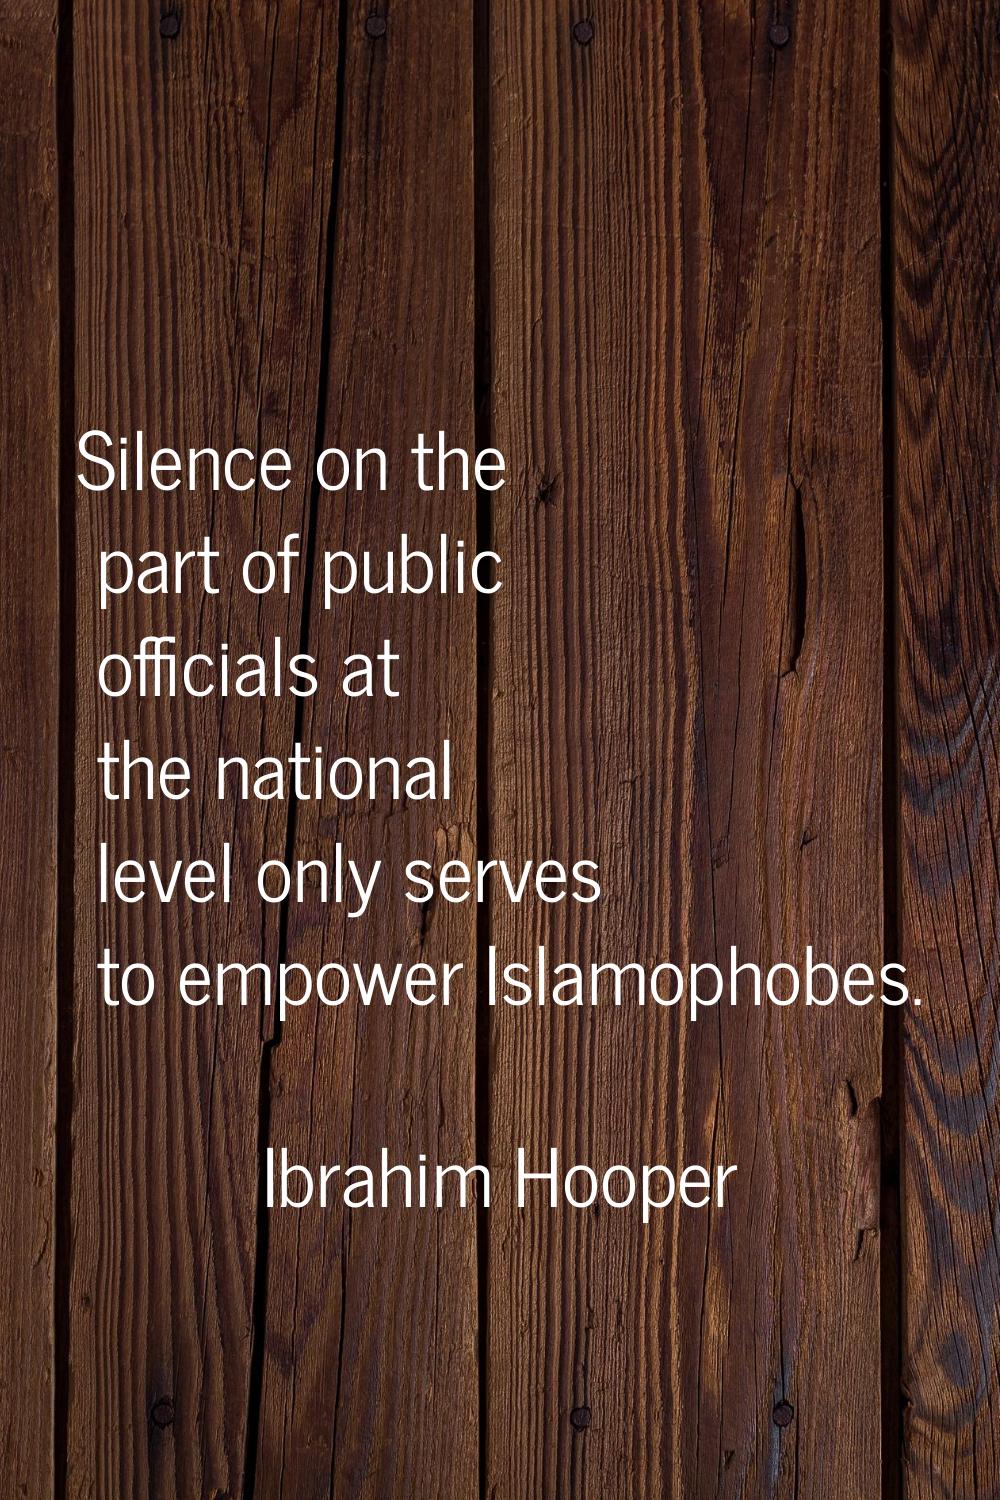 Silence on the part of public officials at the national level only serves to empower Islamophobes.